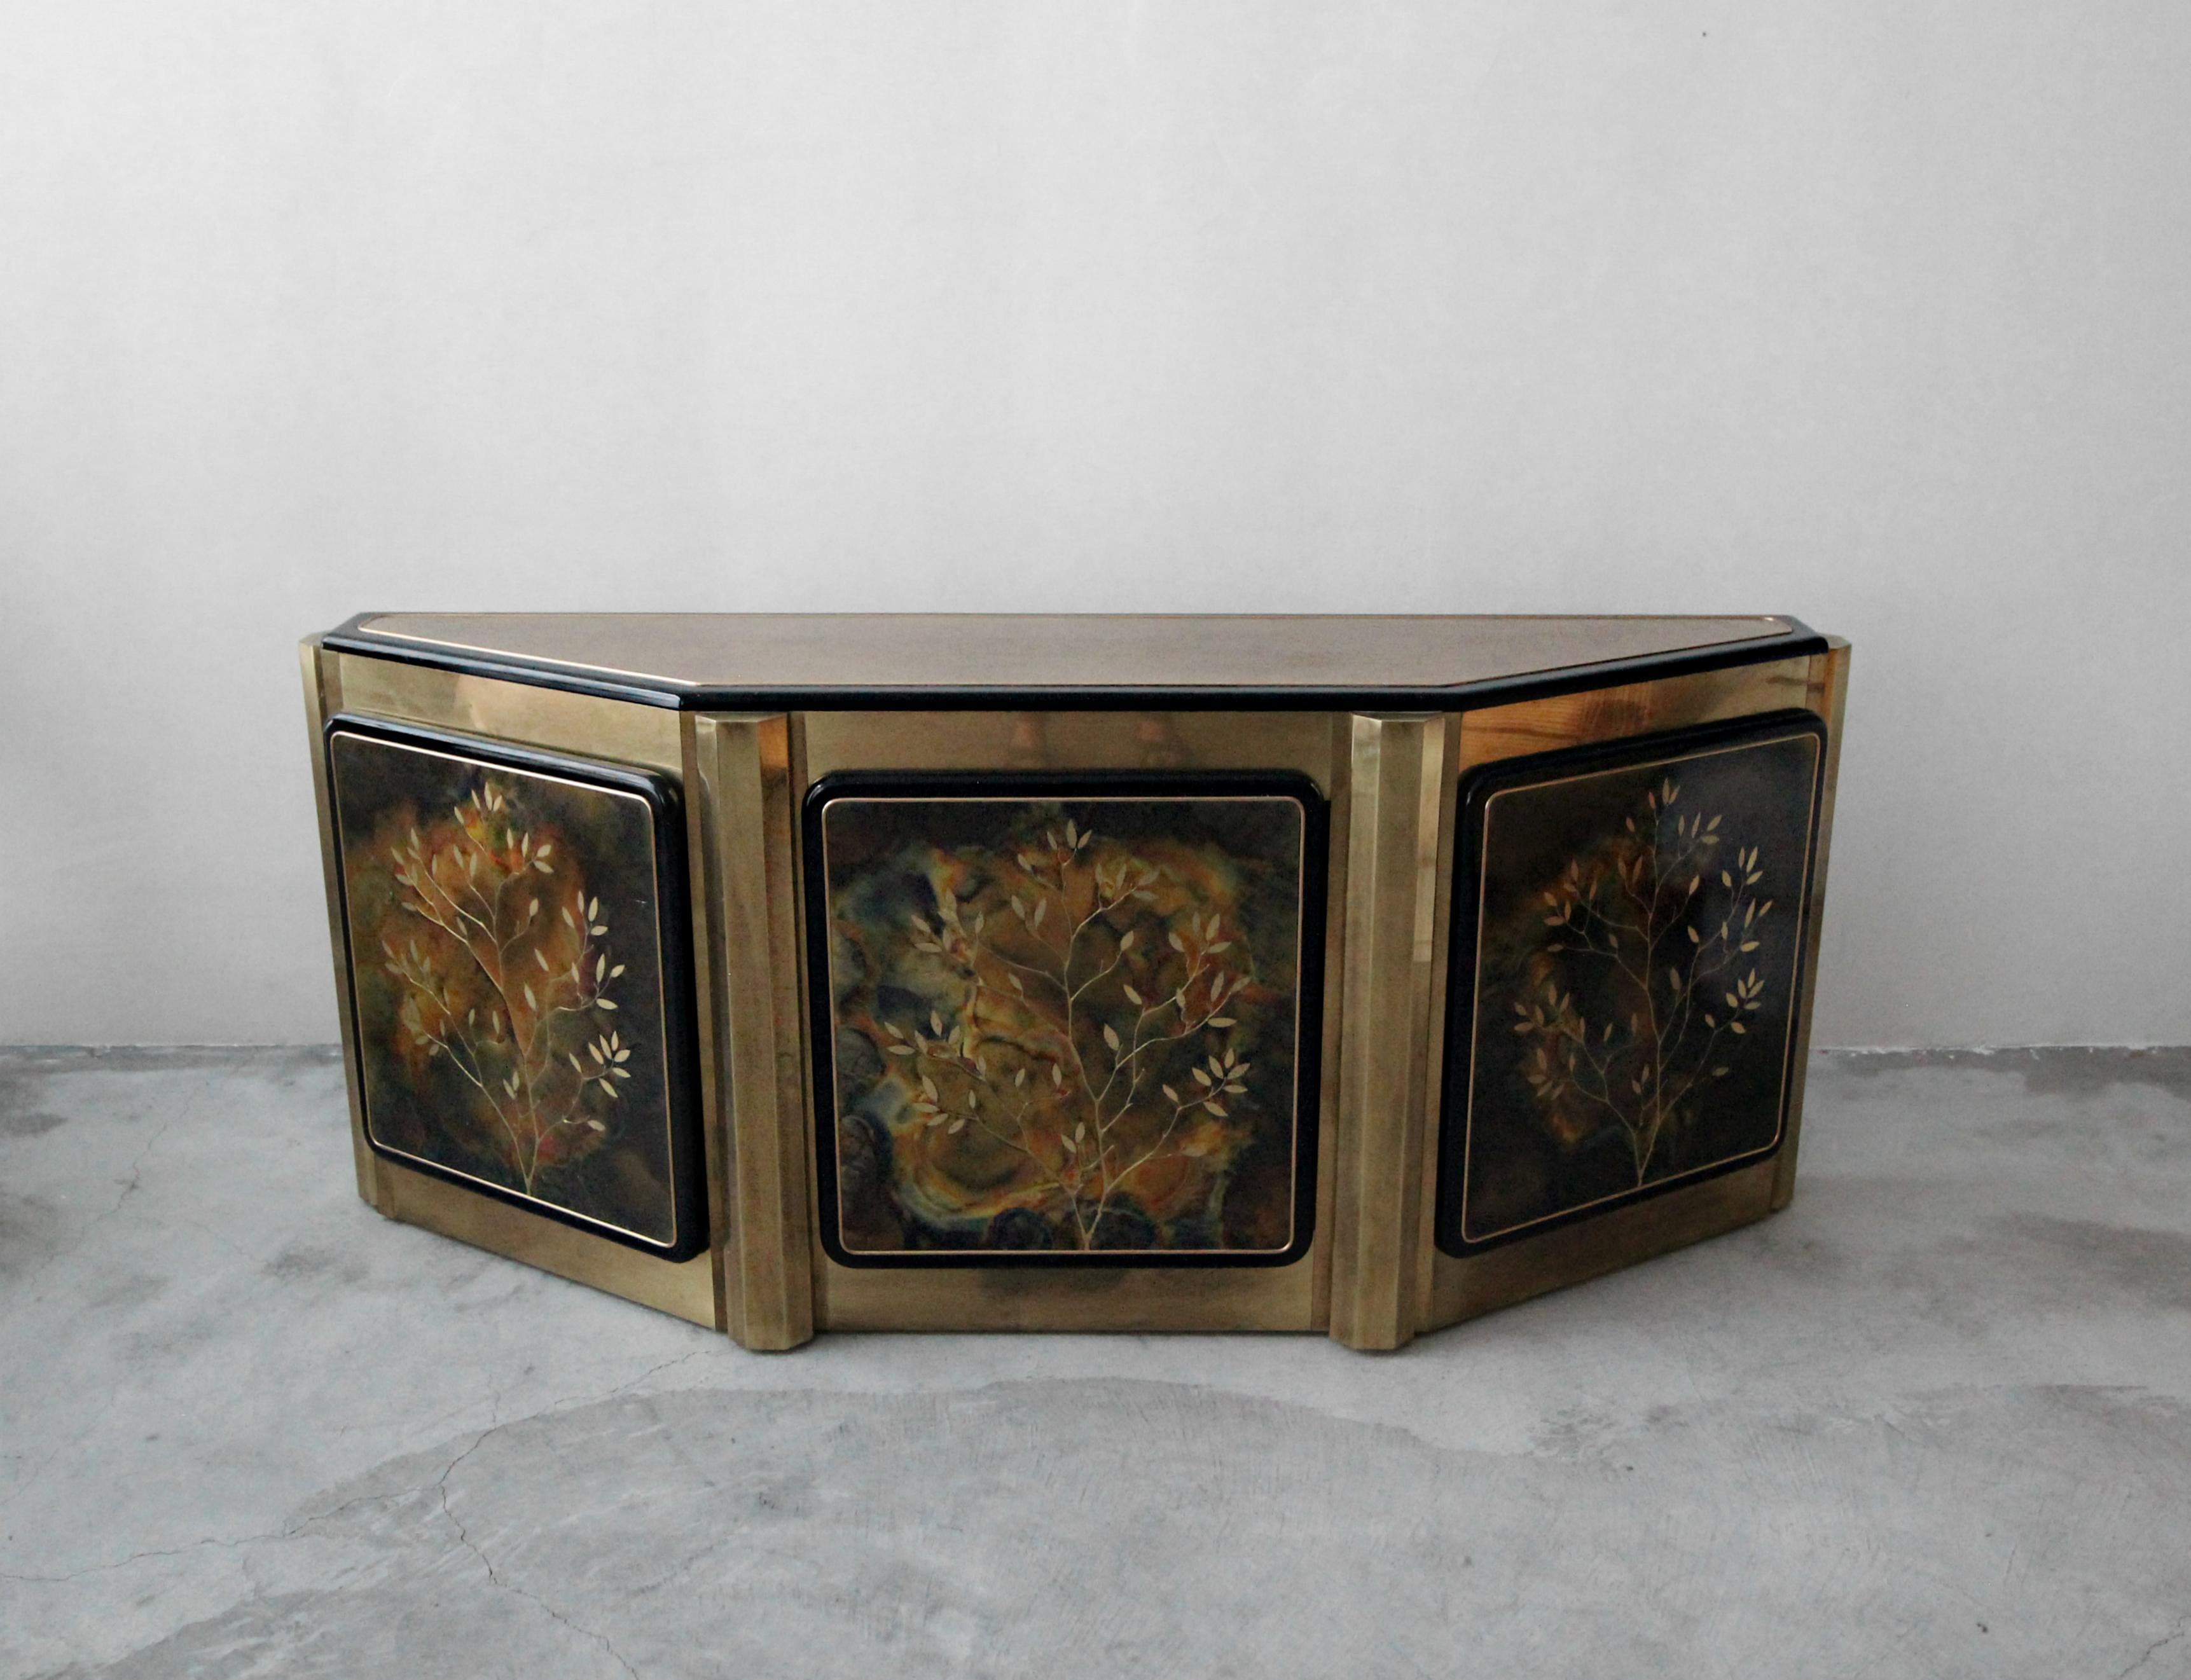 Beautiful angular brass-clad credenza by Bernhard Rohne for Mastercraft. Acid etched doors with a 